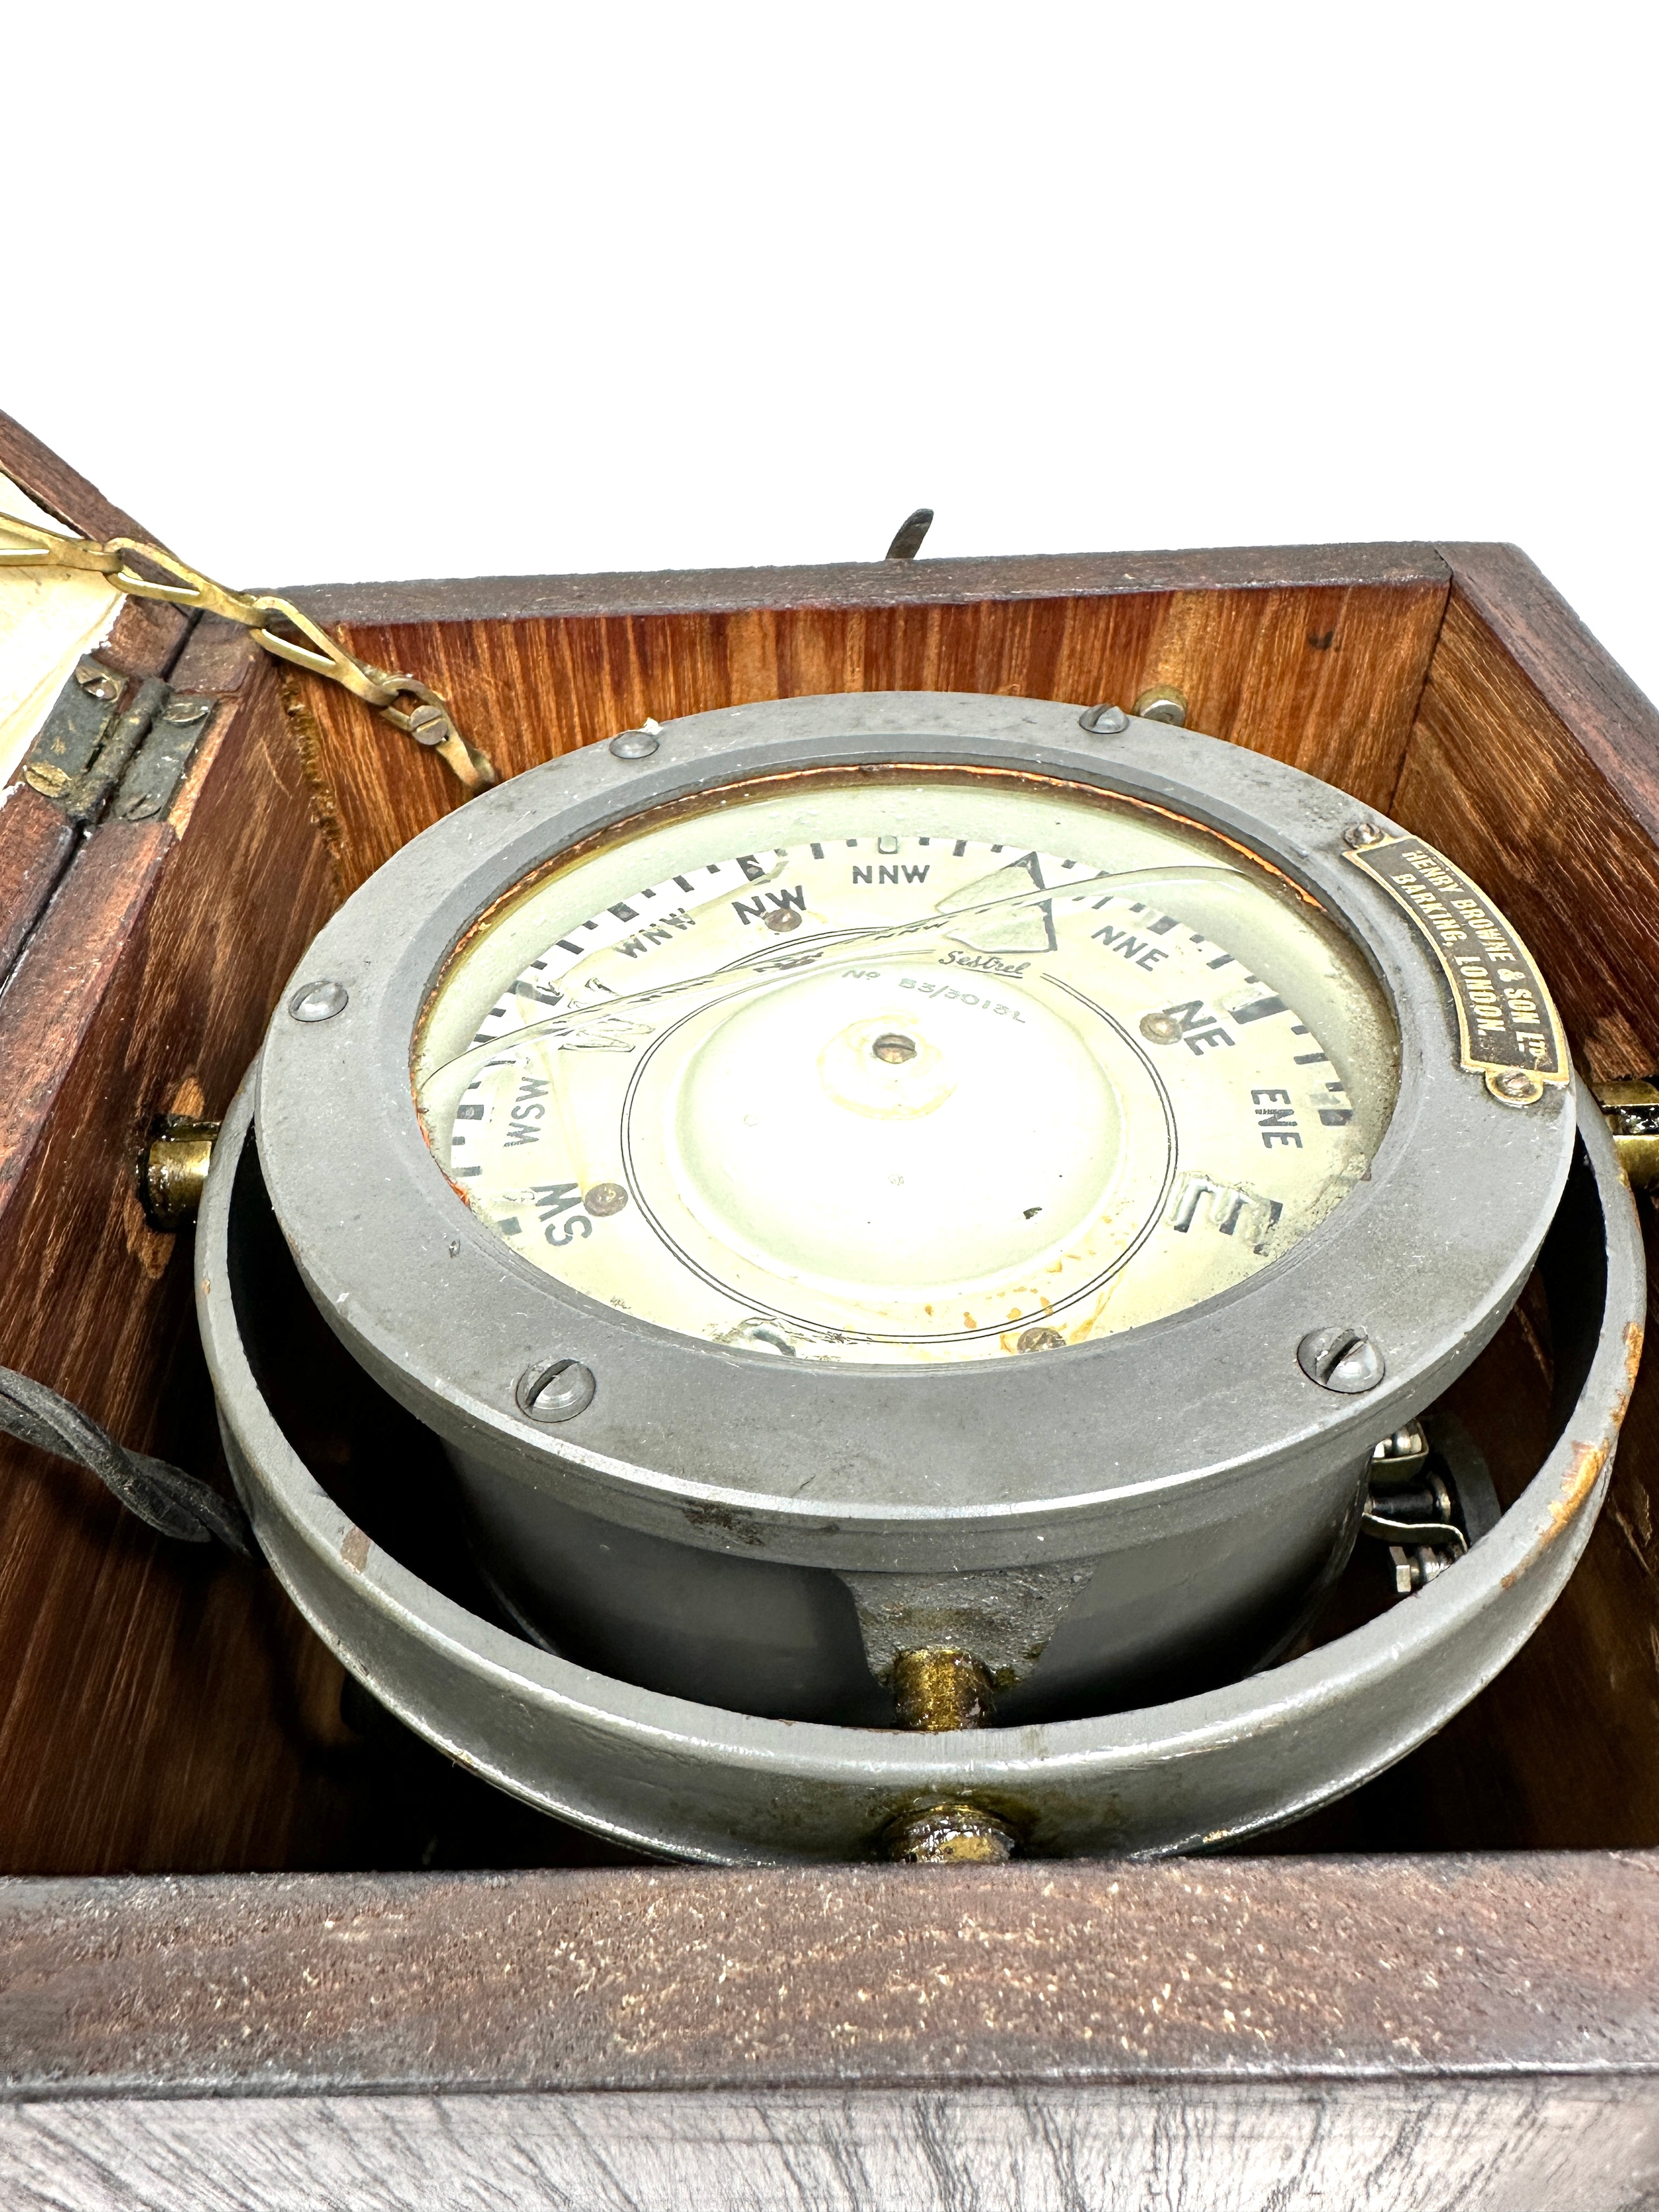 Henry Browne & Sons sestrel marine Ship Compass no b3/3013l in wooden case - Image 5 of 6